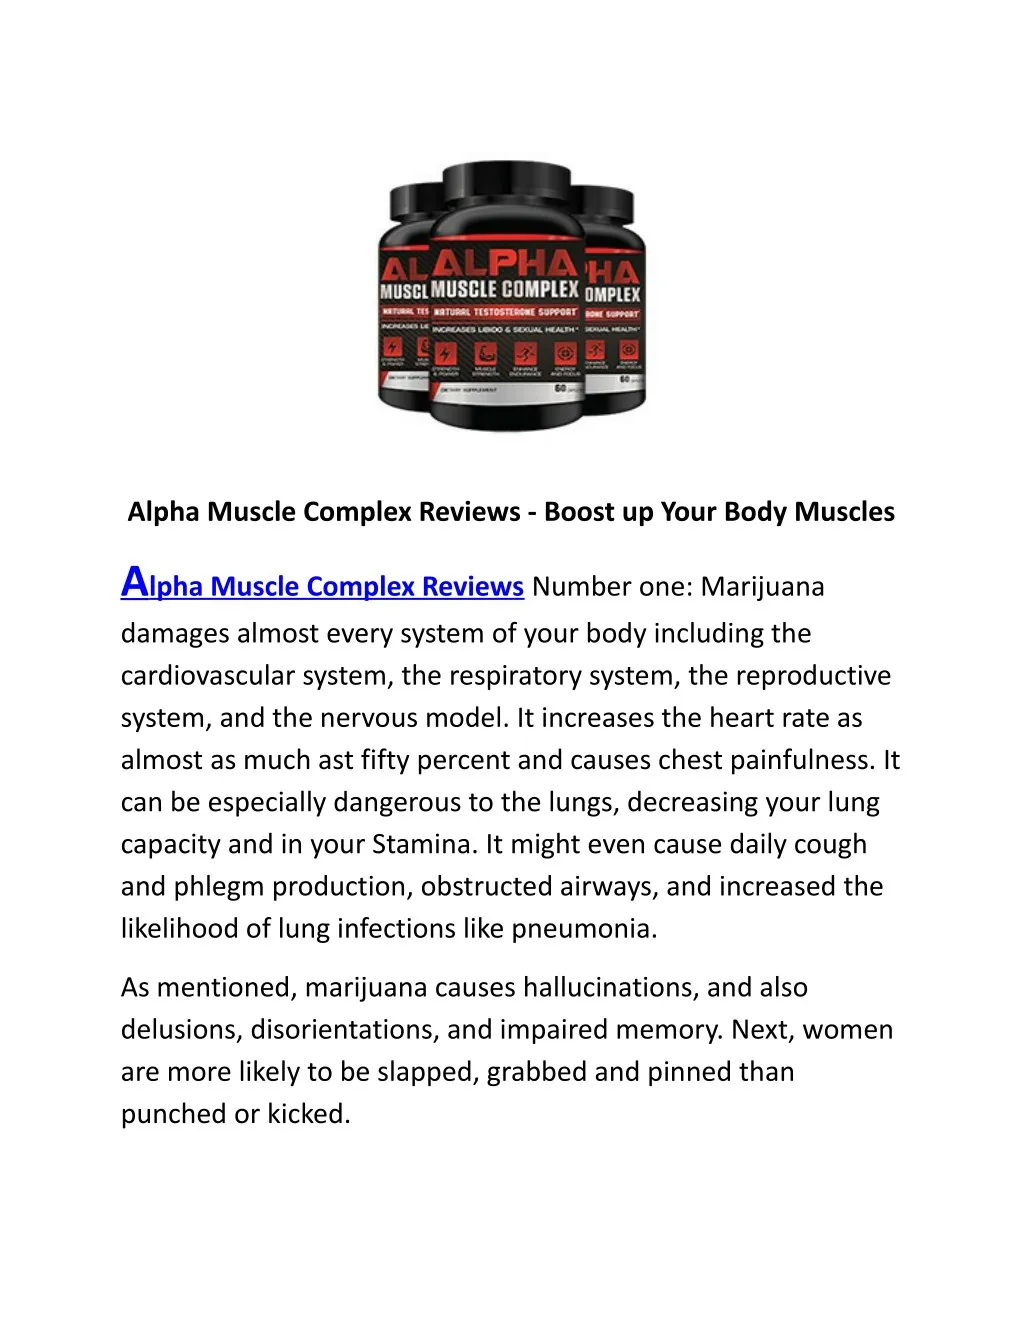 alpha muscle complex reviews boost up your body